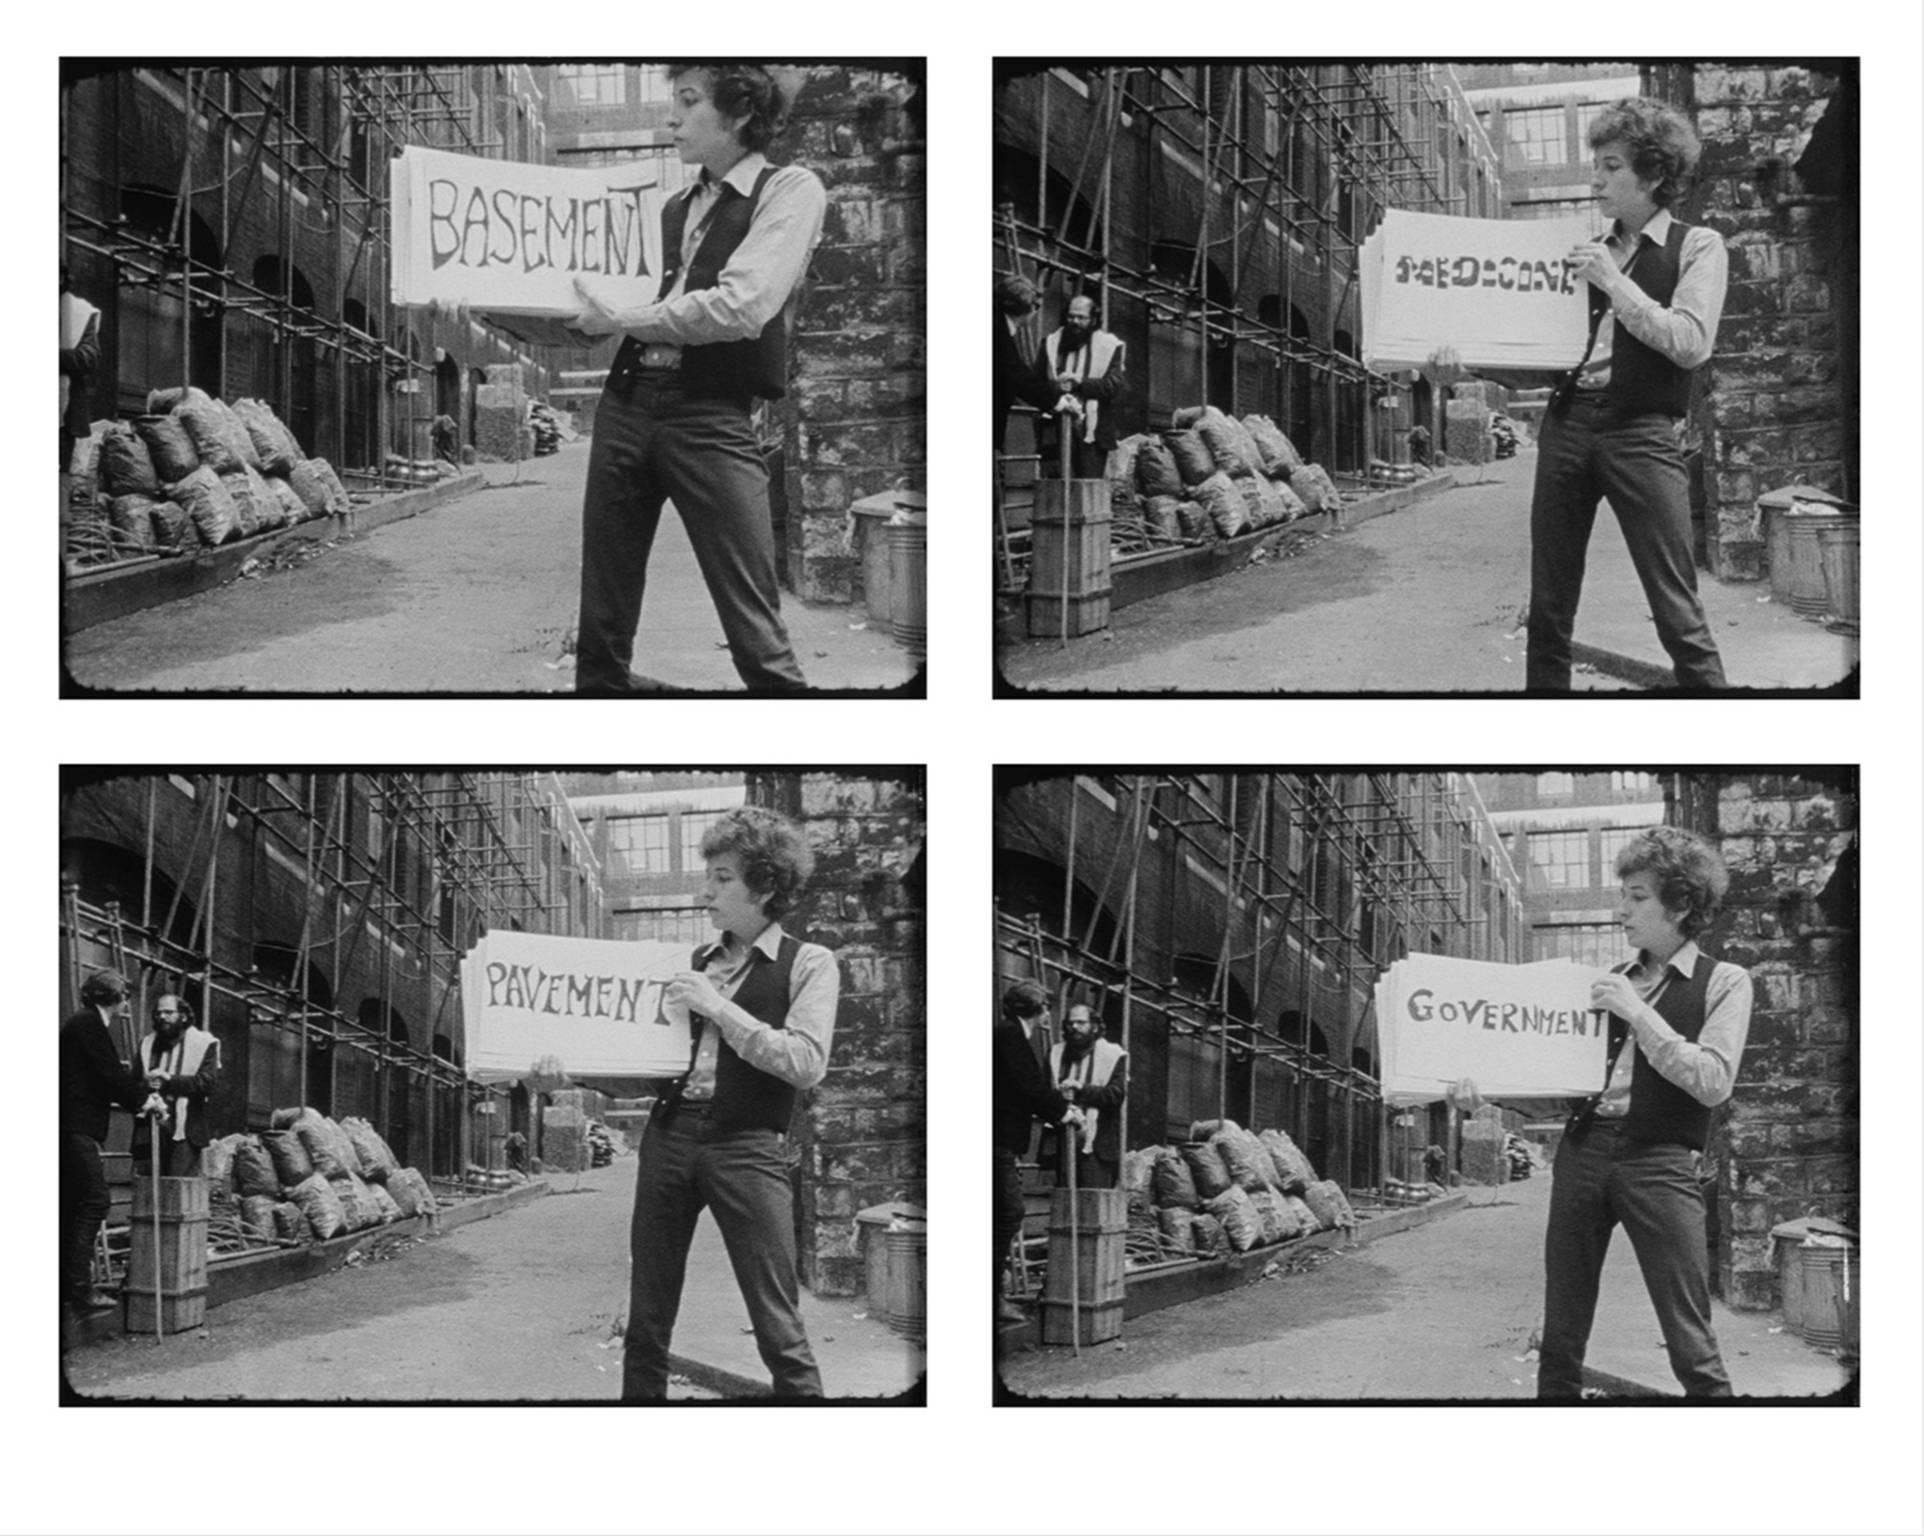 Bob Dylan in cue card scene from DONT LOOK BACK (quadtych) - Mixed Media Art by D.A. Pennebaker